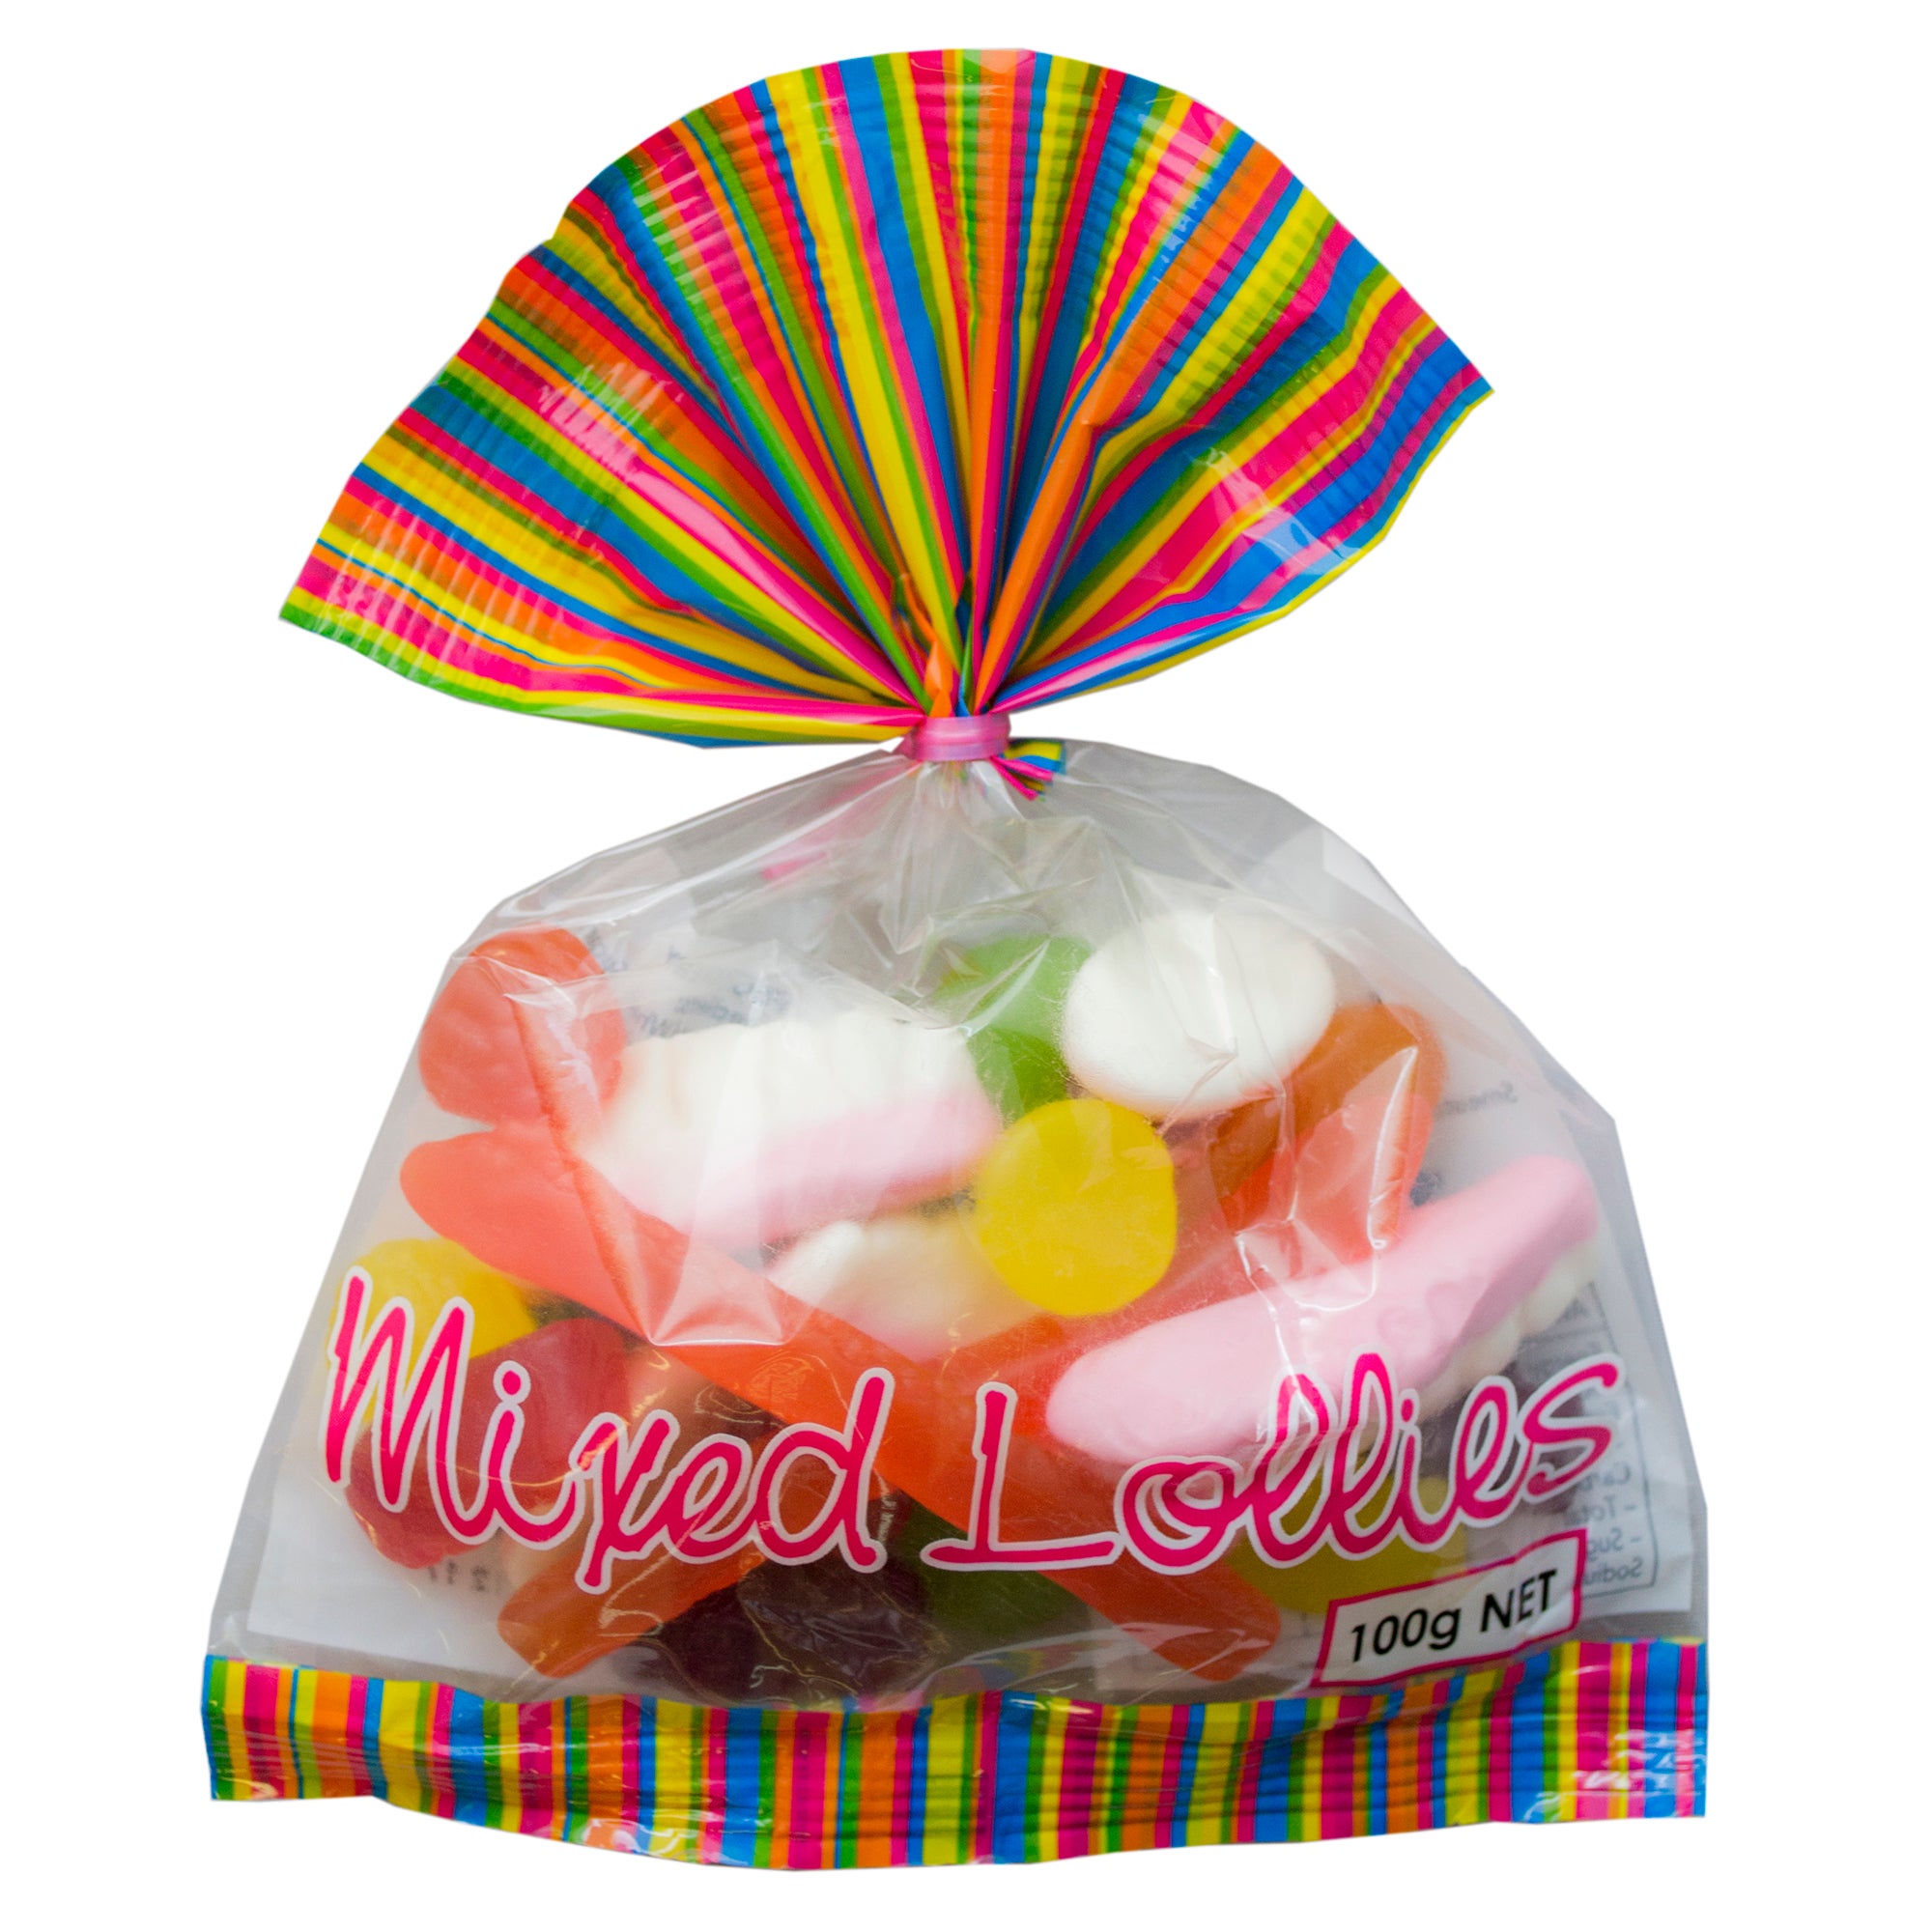 Bagged Lollies – Tagged 